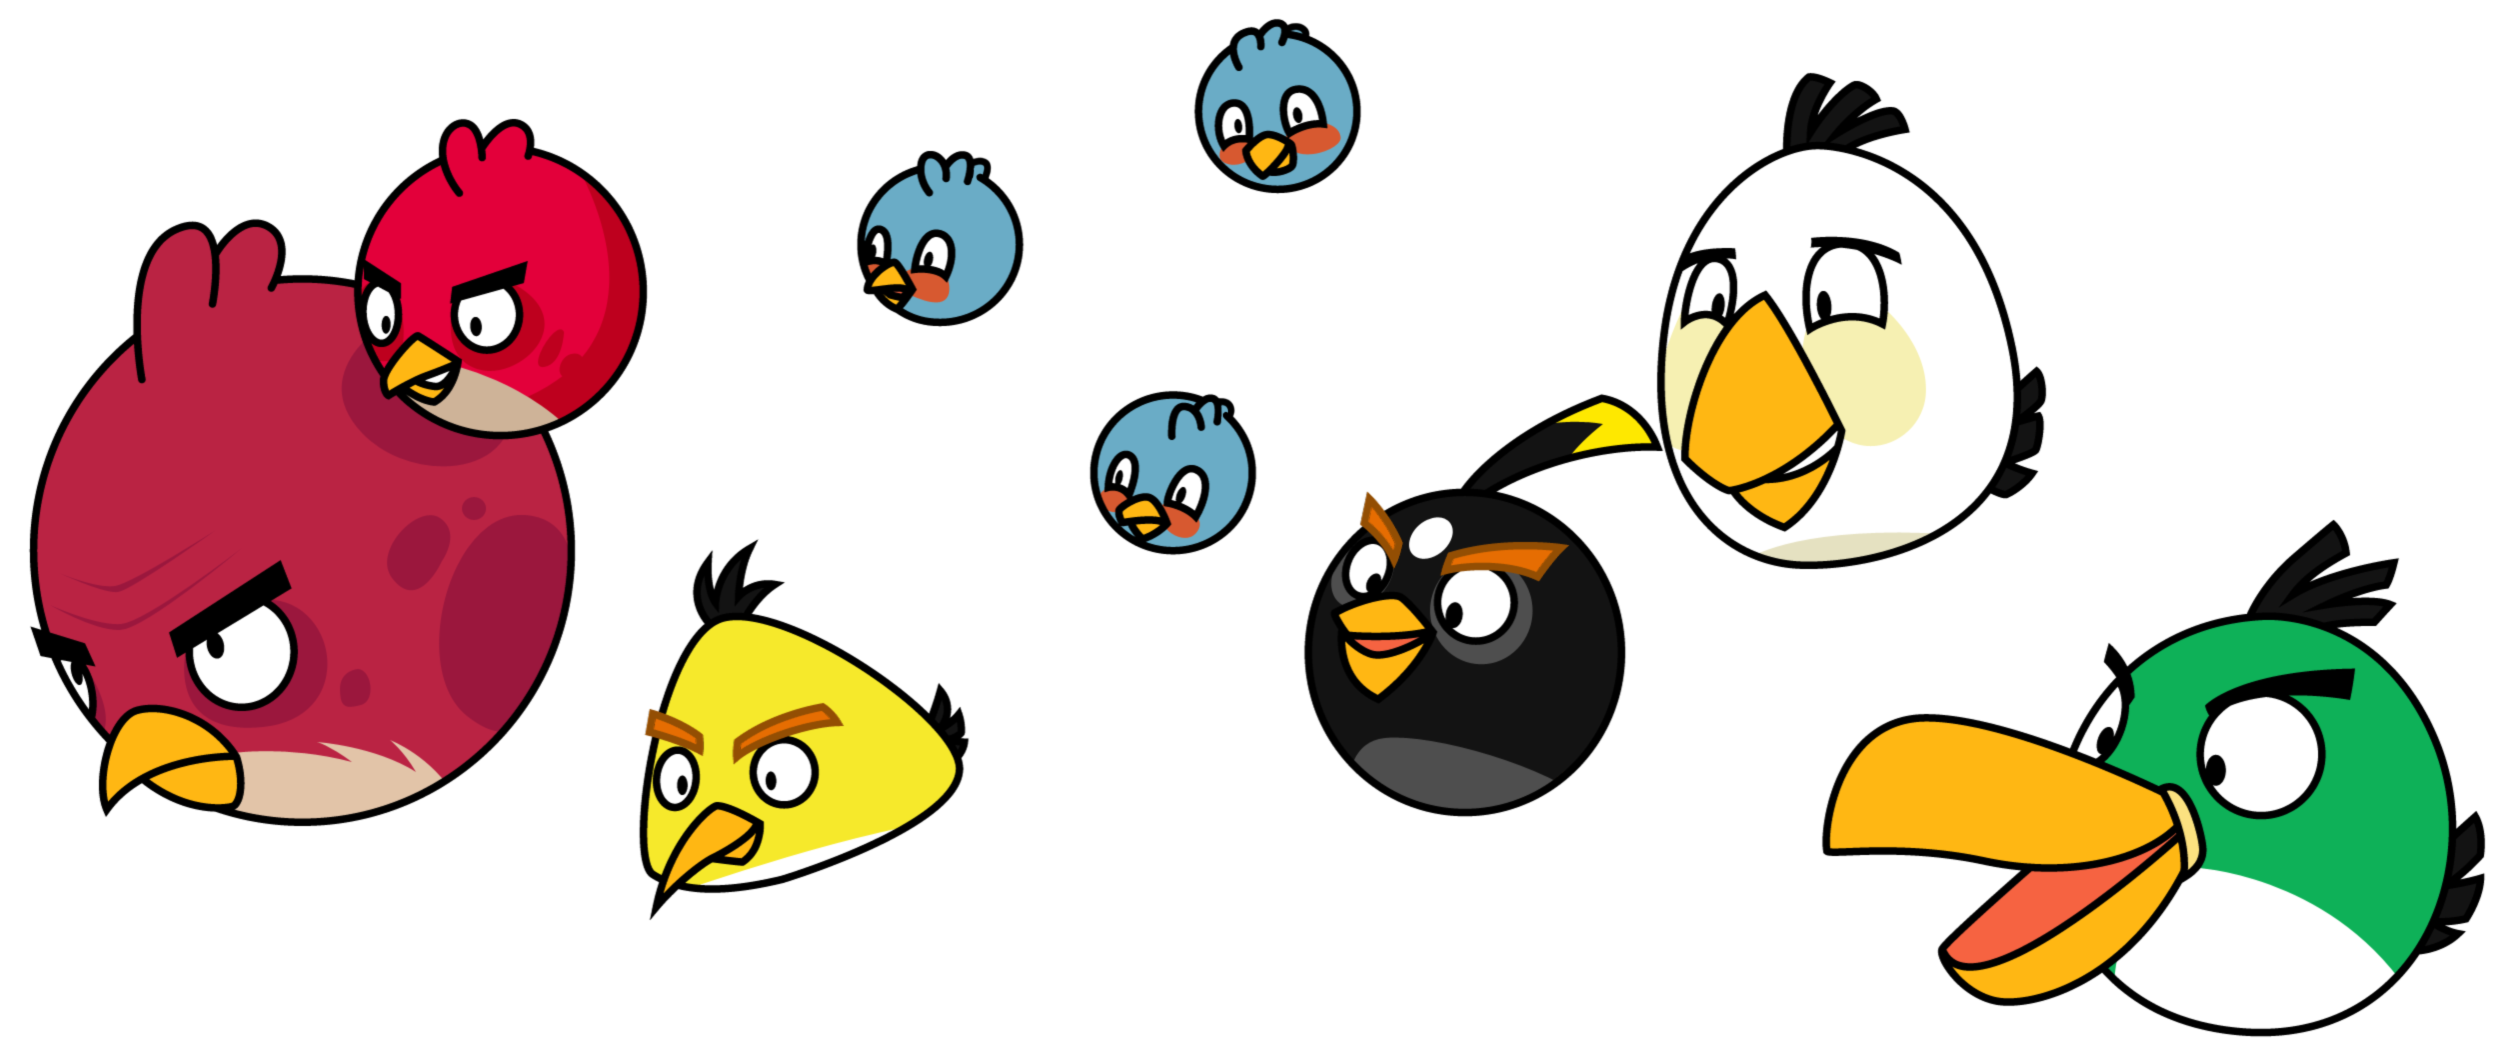 Angry Birds Wallpaper Image for iPad - Cartoons Wallpapers